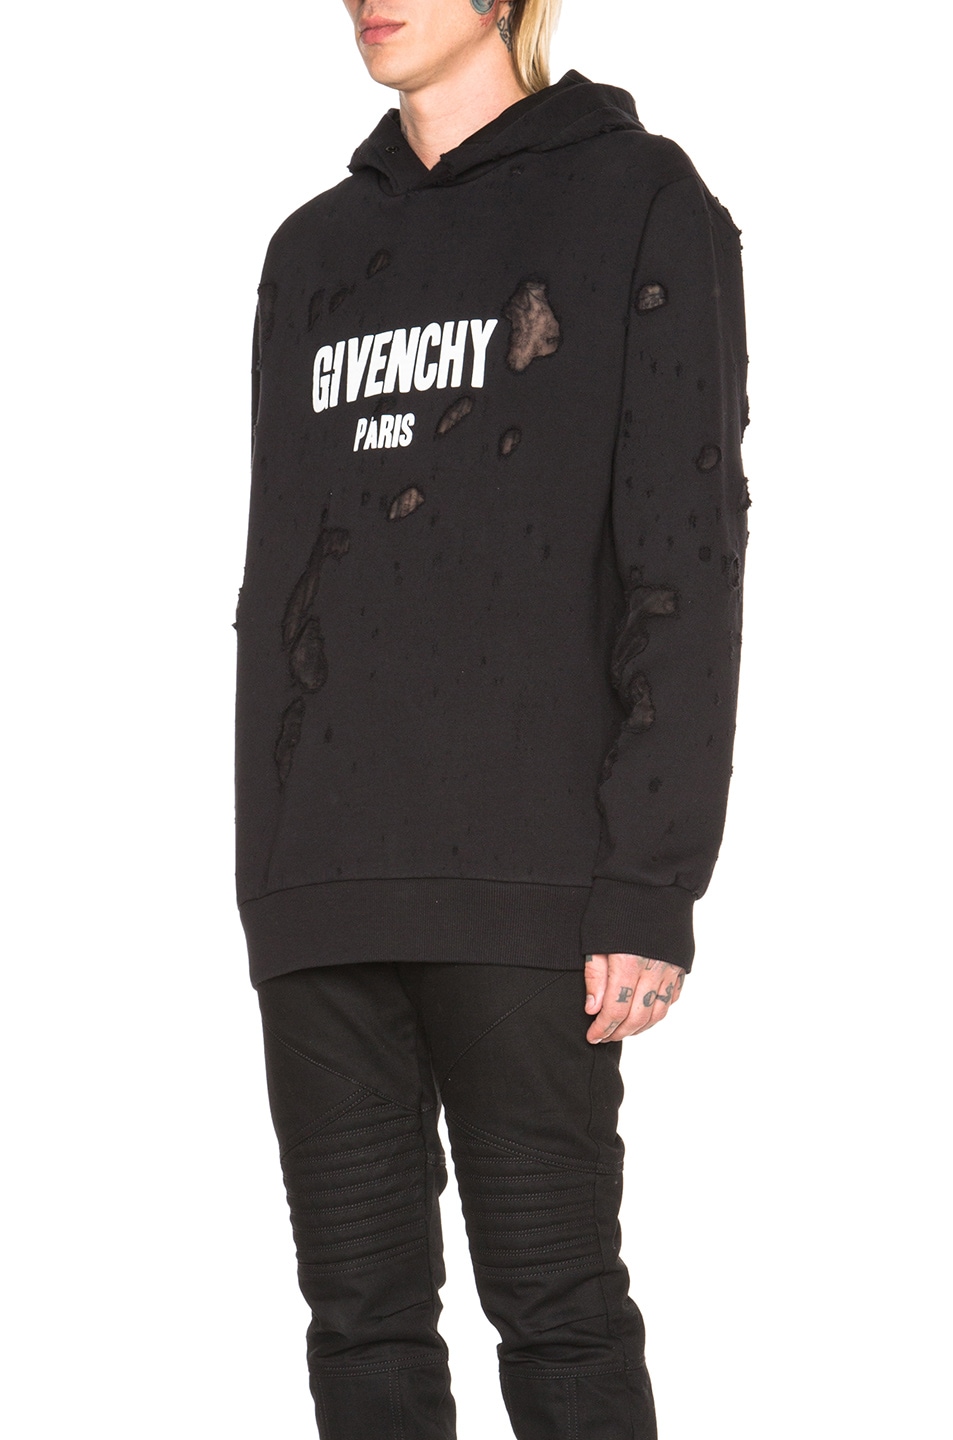 givenchy paris destroyed hoodie price